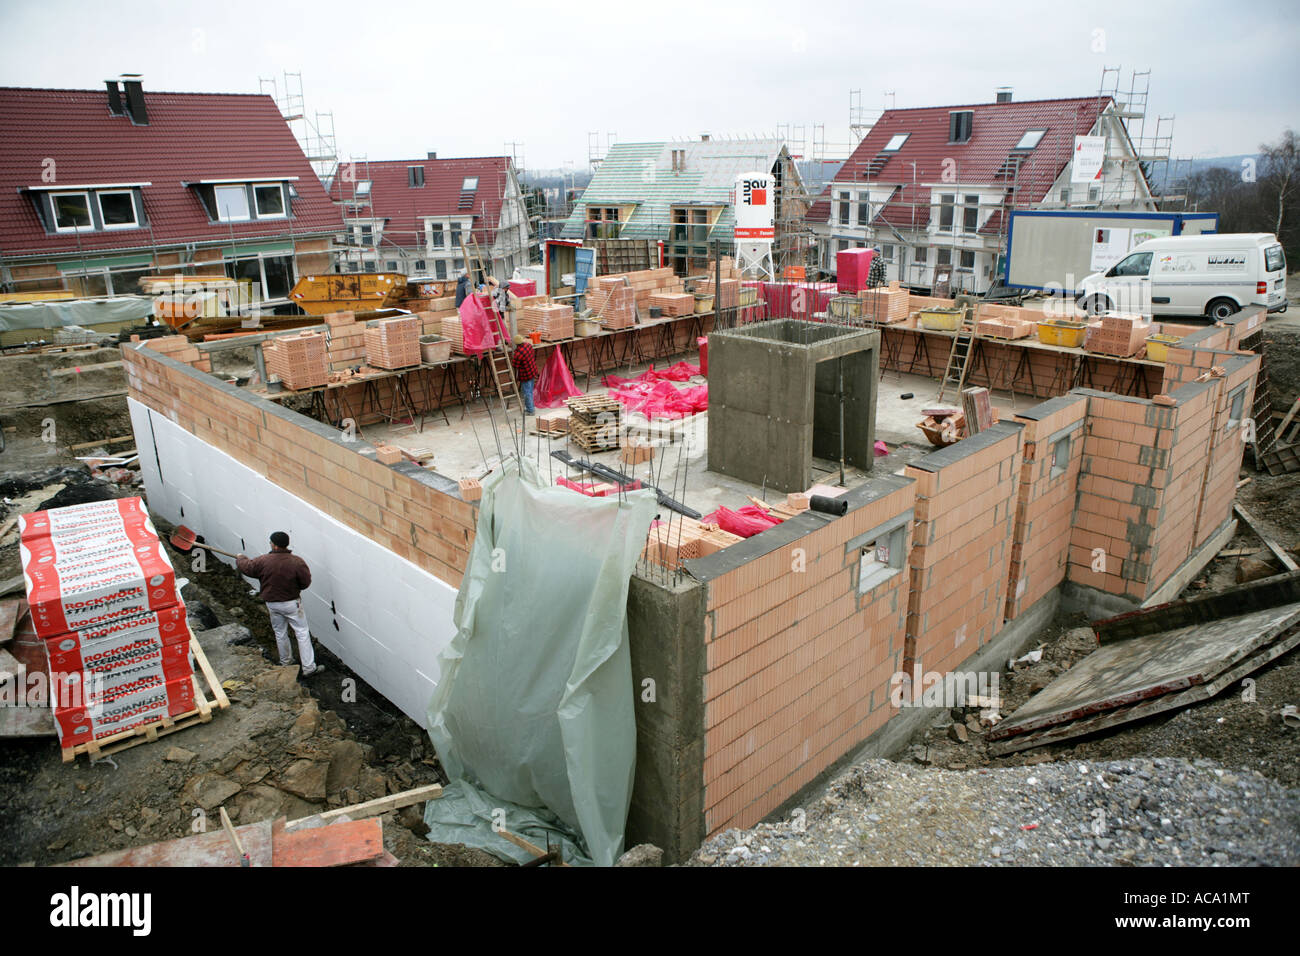 Construction site of private houses, Essen, North Rhine-Westphalia, Germany Stock Photo